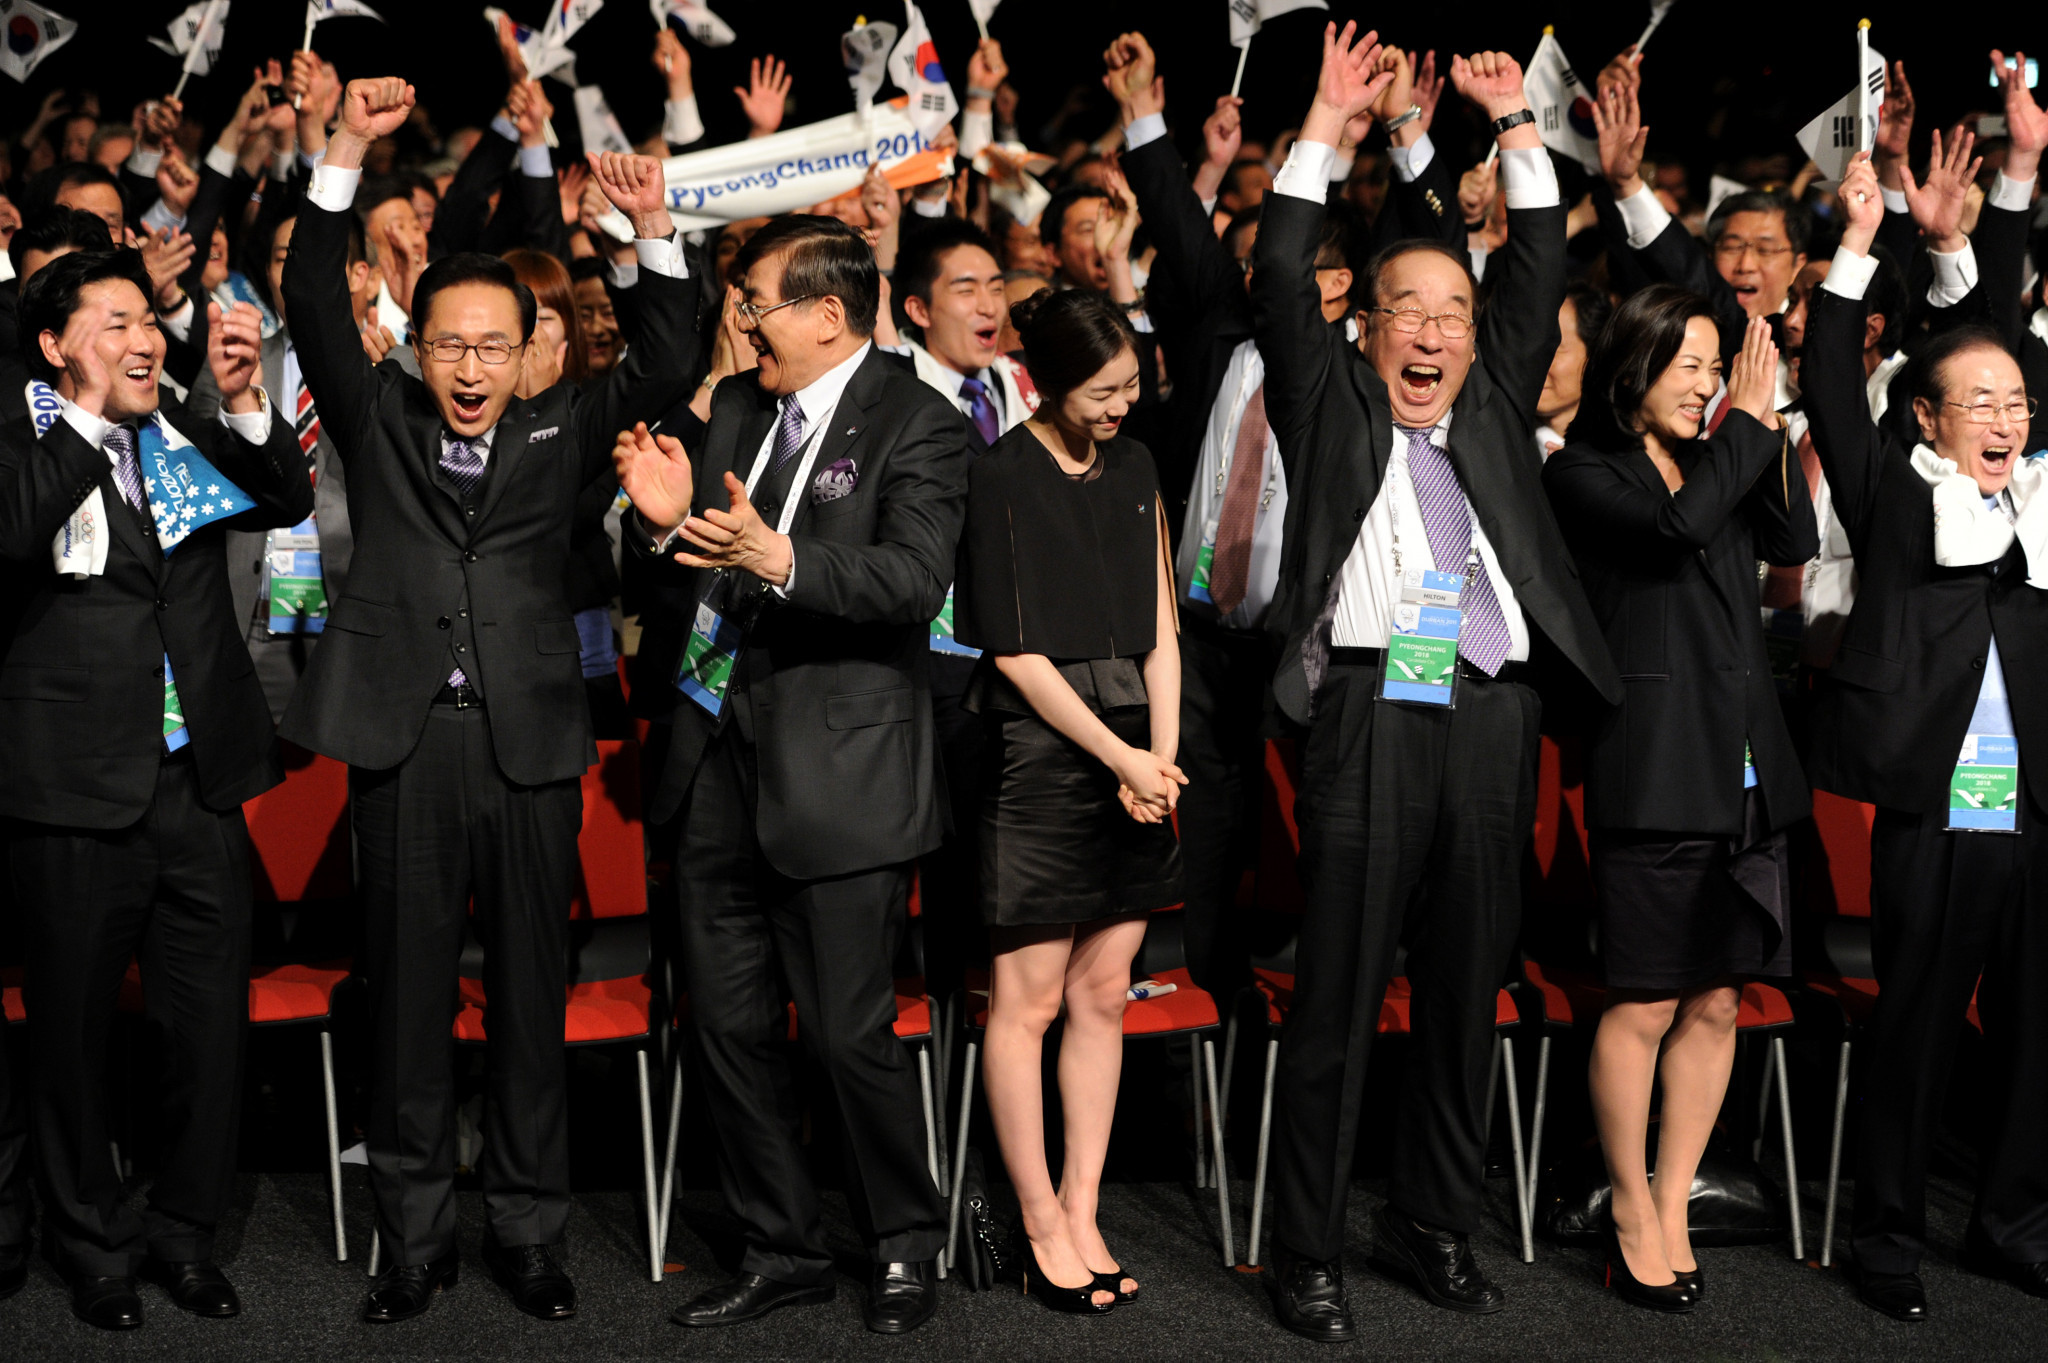 Yang Ho Cho, third left, celebrates in Durban in 2011 after it was announced that Pyeongchang had been awarded the 2018 Winter Olympic and Paralympic Games ©Getty Images